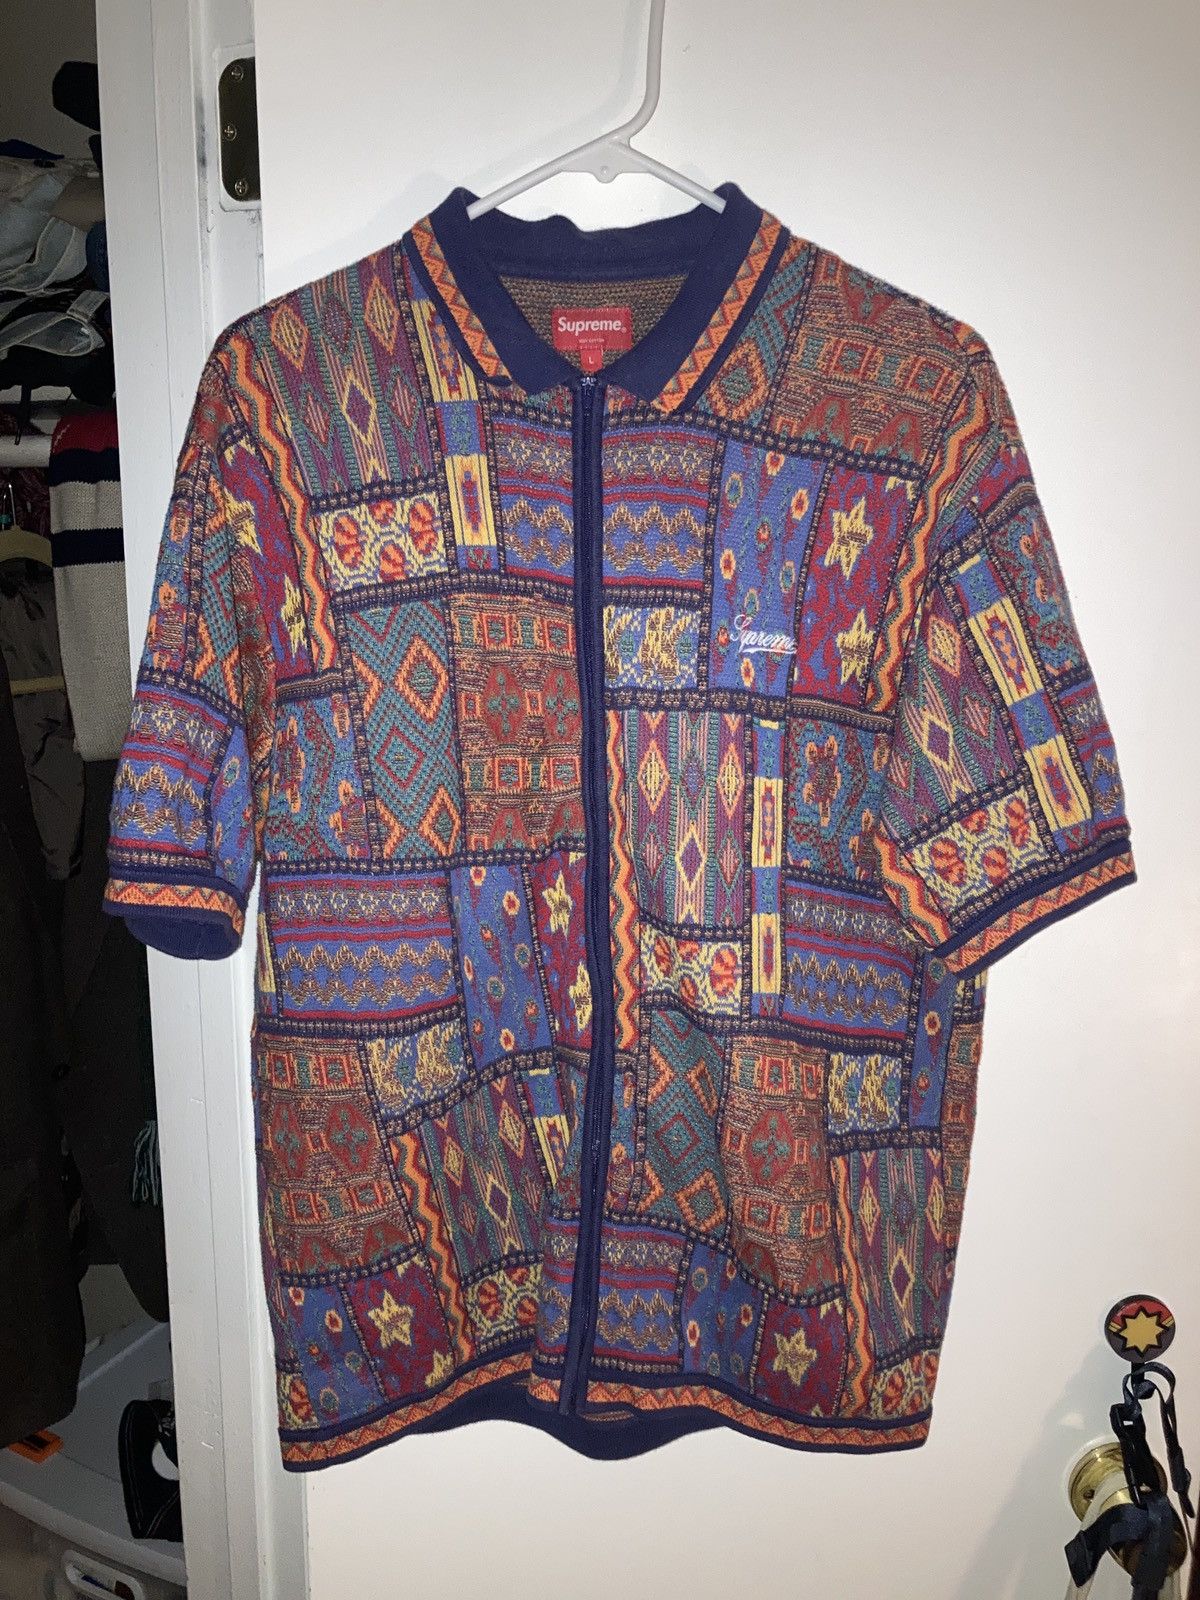 Supreme Patchwork Knit Zip Up Polo | Grailed